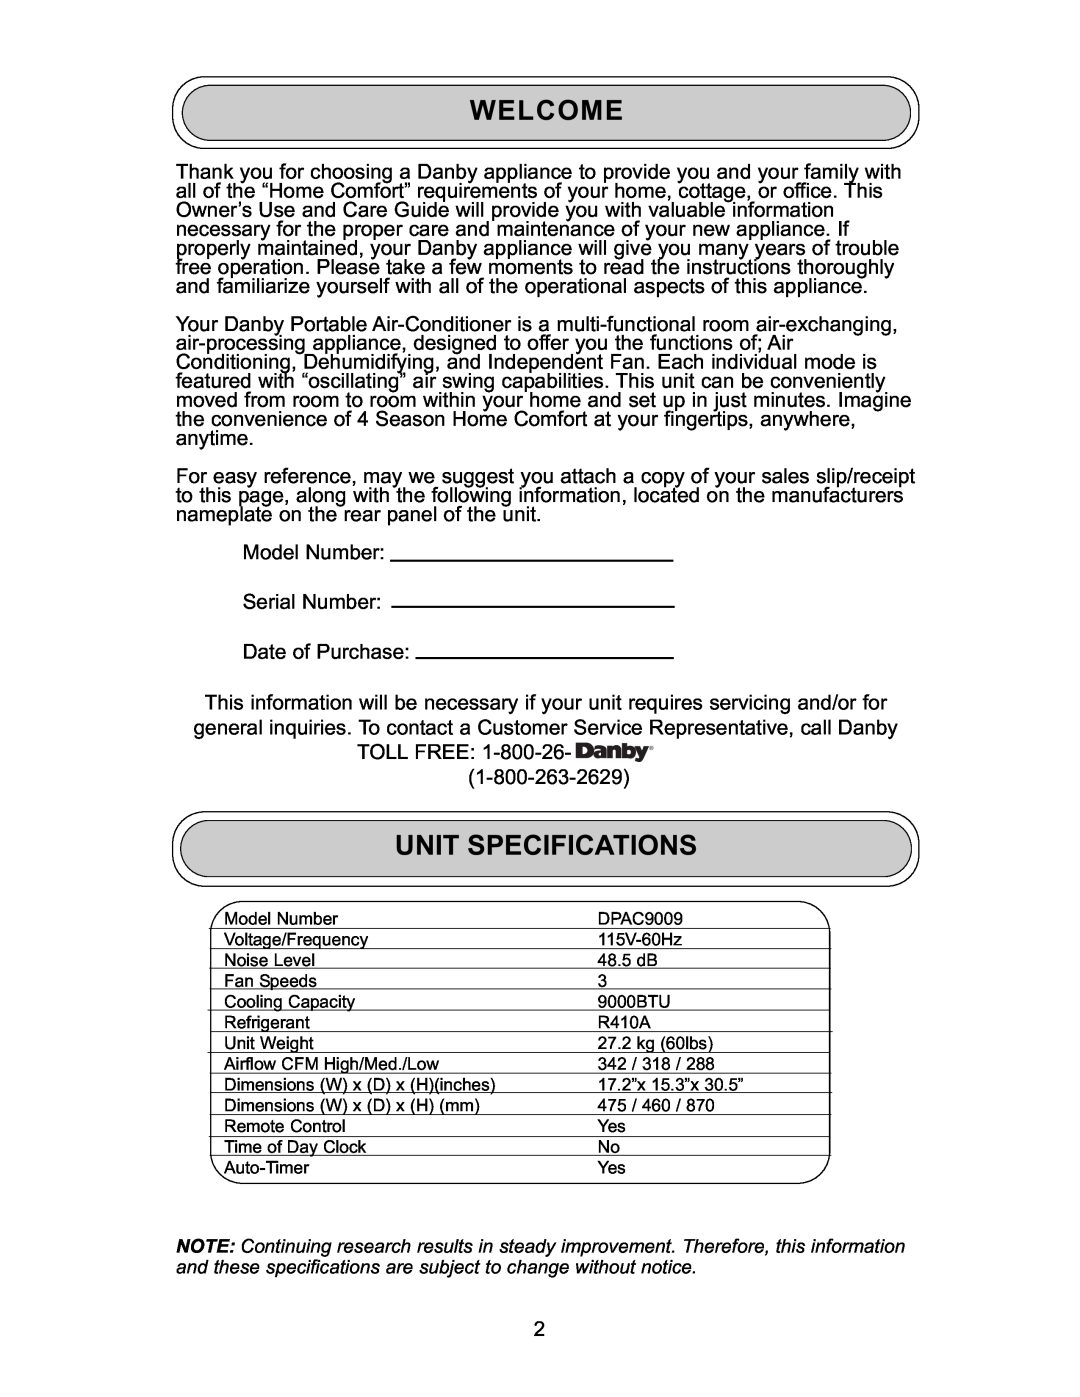 Danby DPAC 9009 manual Welcome, Unit Specifications 